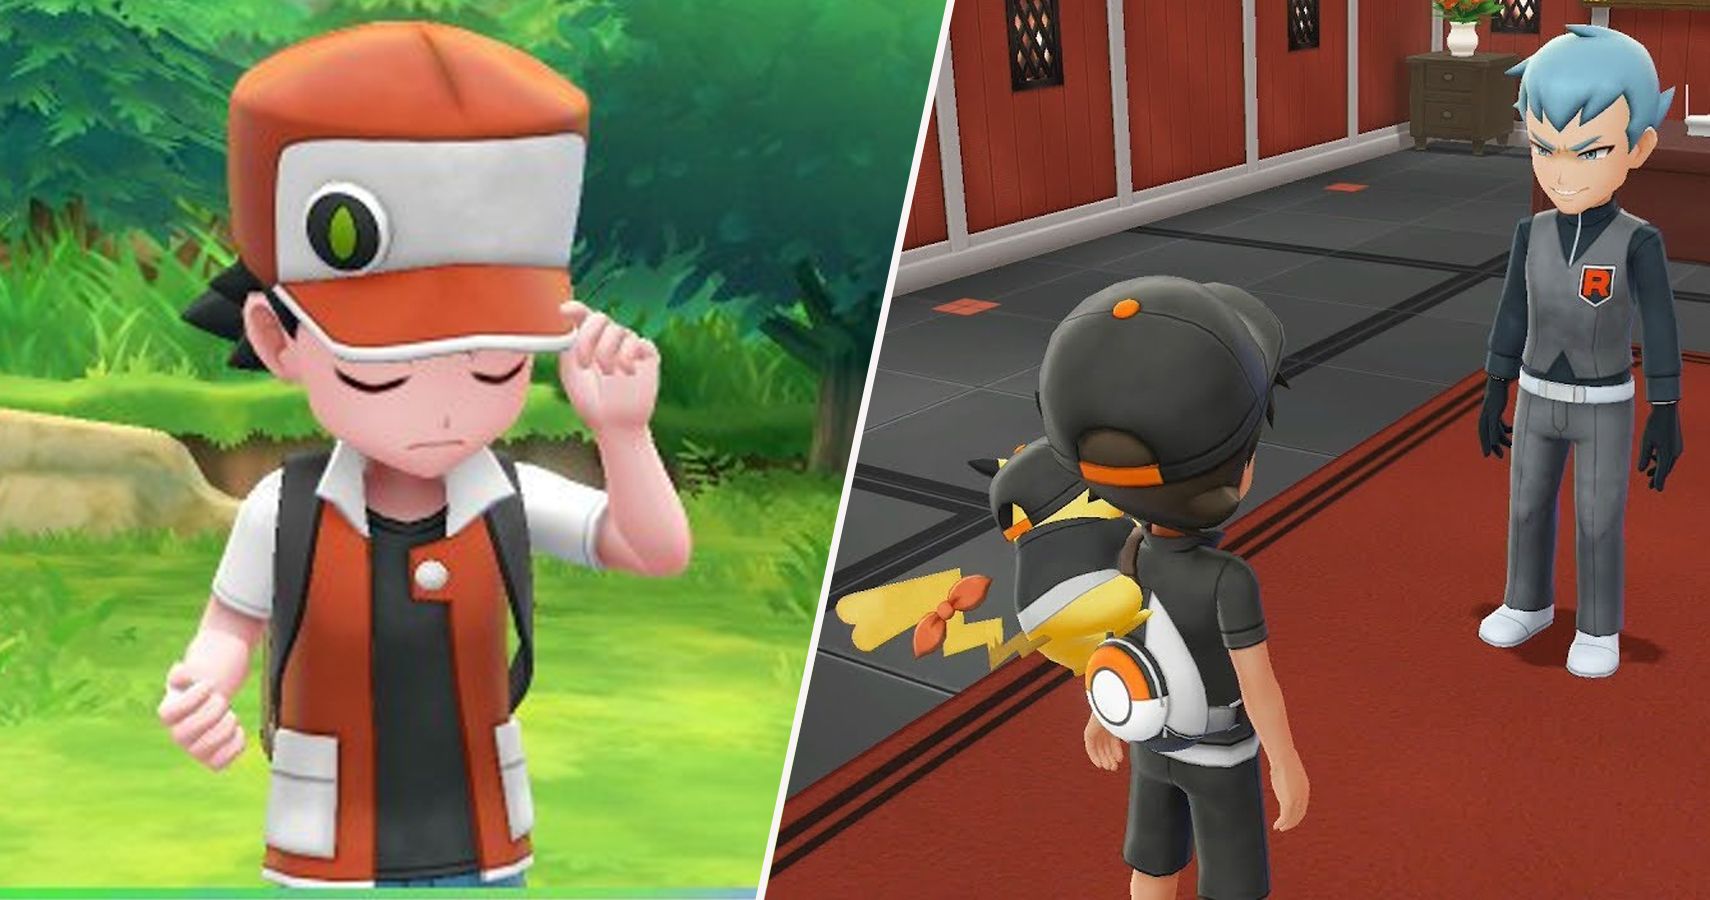 How to Get ALL Alolan Forms in Pokémon Let's Go Pikachu and Eevee - ALL  Alolan Form Locations! 